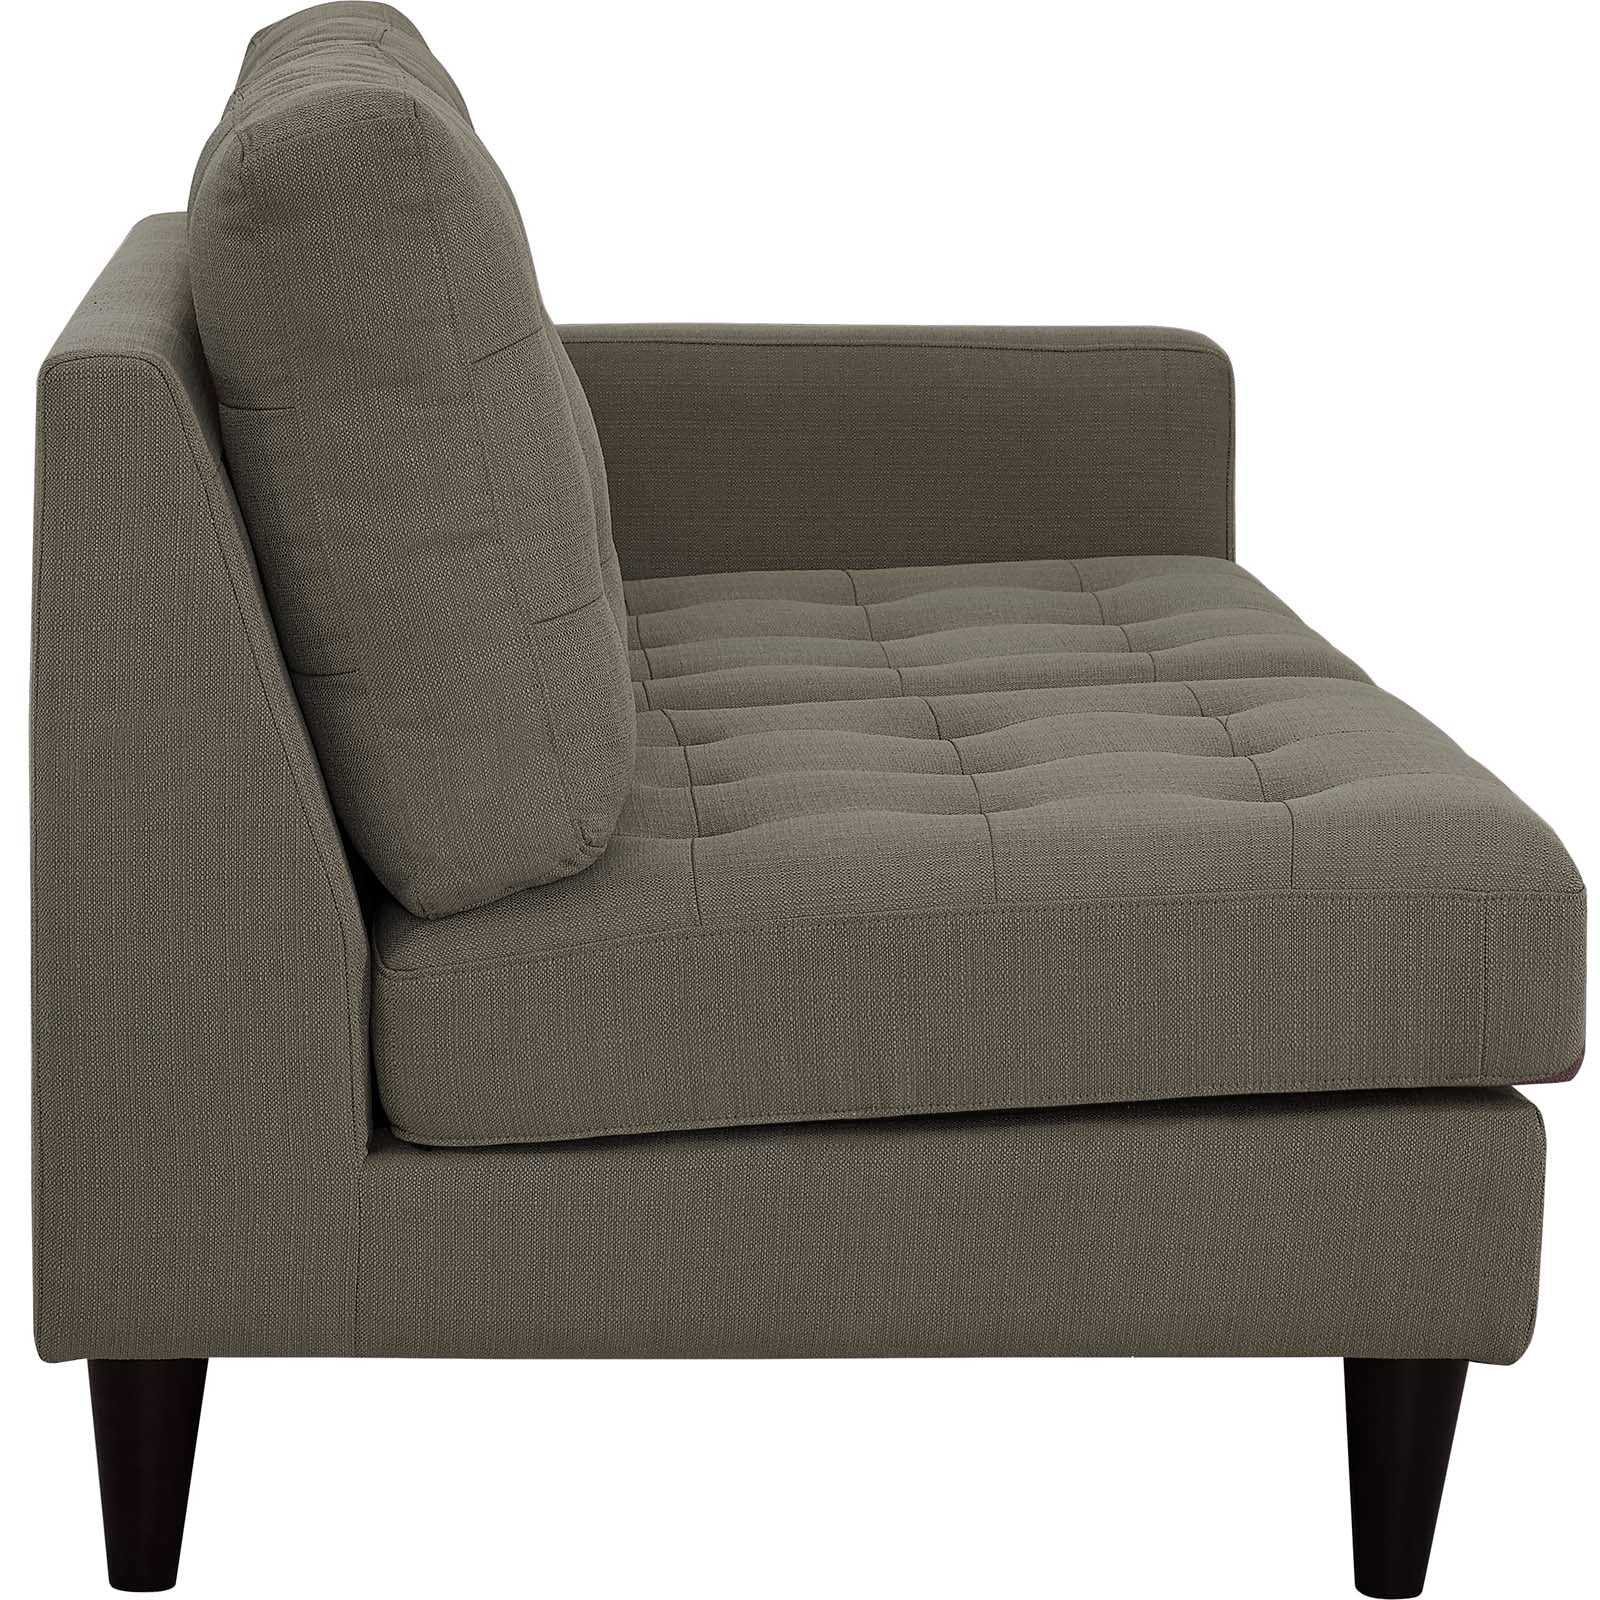 Empress Right-Facing Upholstered Fabric Loveseat - East Shore Modern Home Furnishings